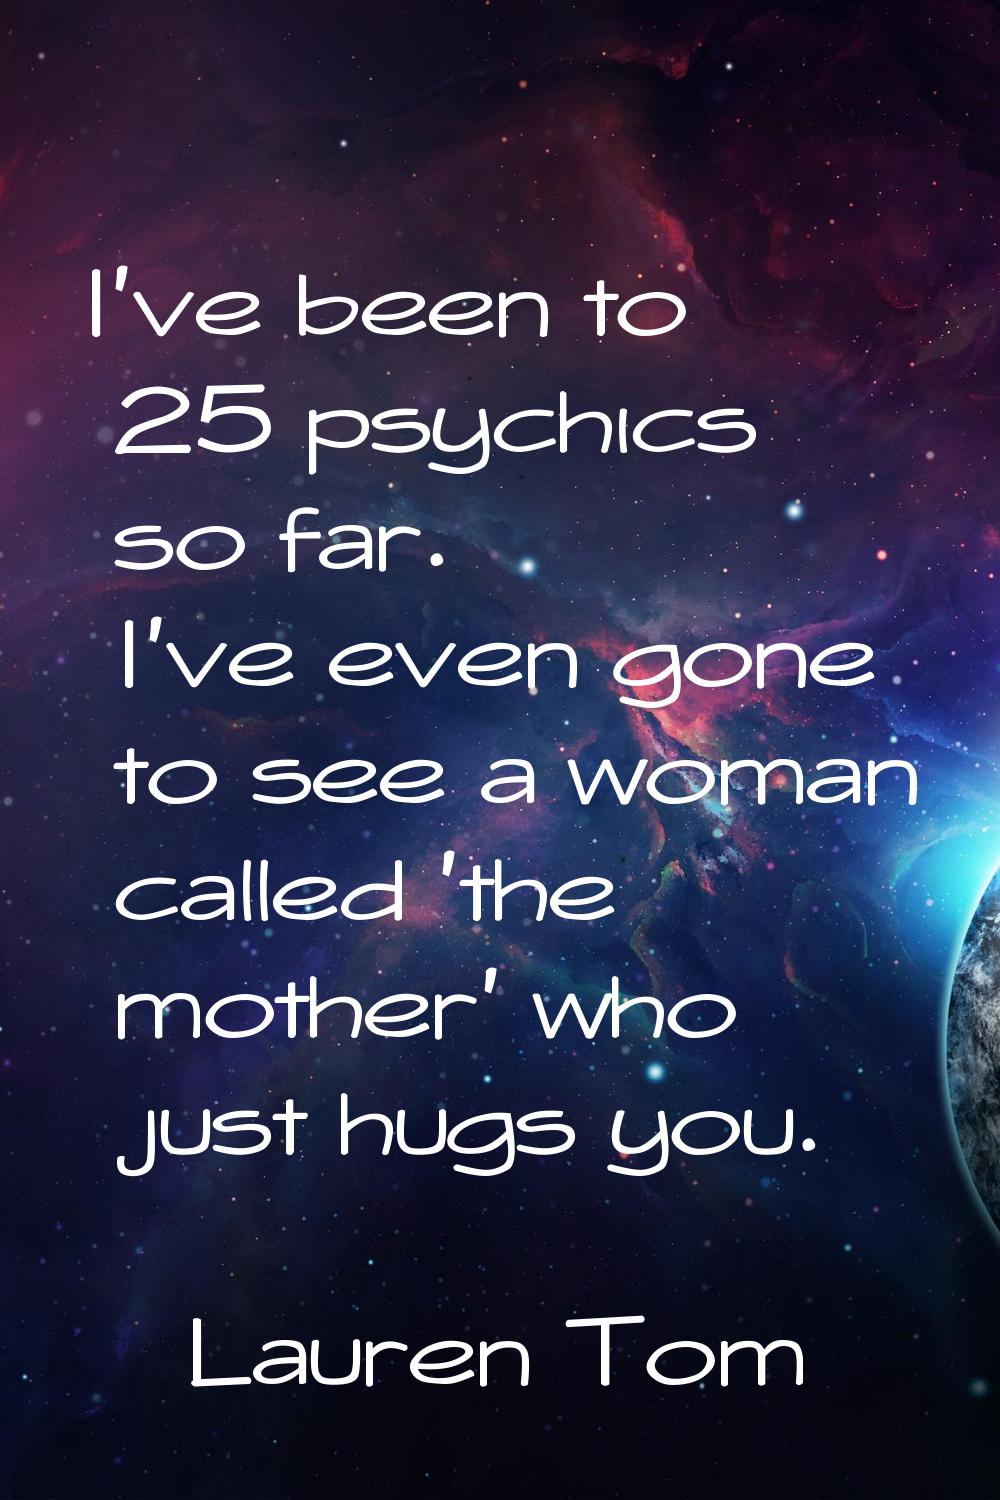 I've been to 25 psychics so far. I've even gone to see a woman called 'the mother' who just hugs yo